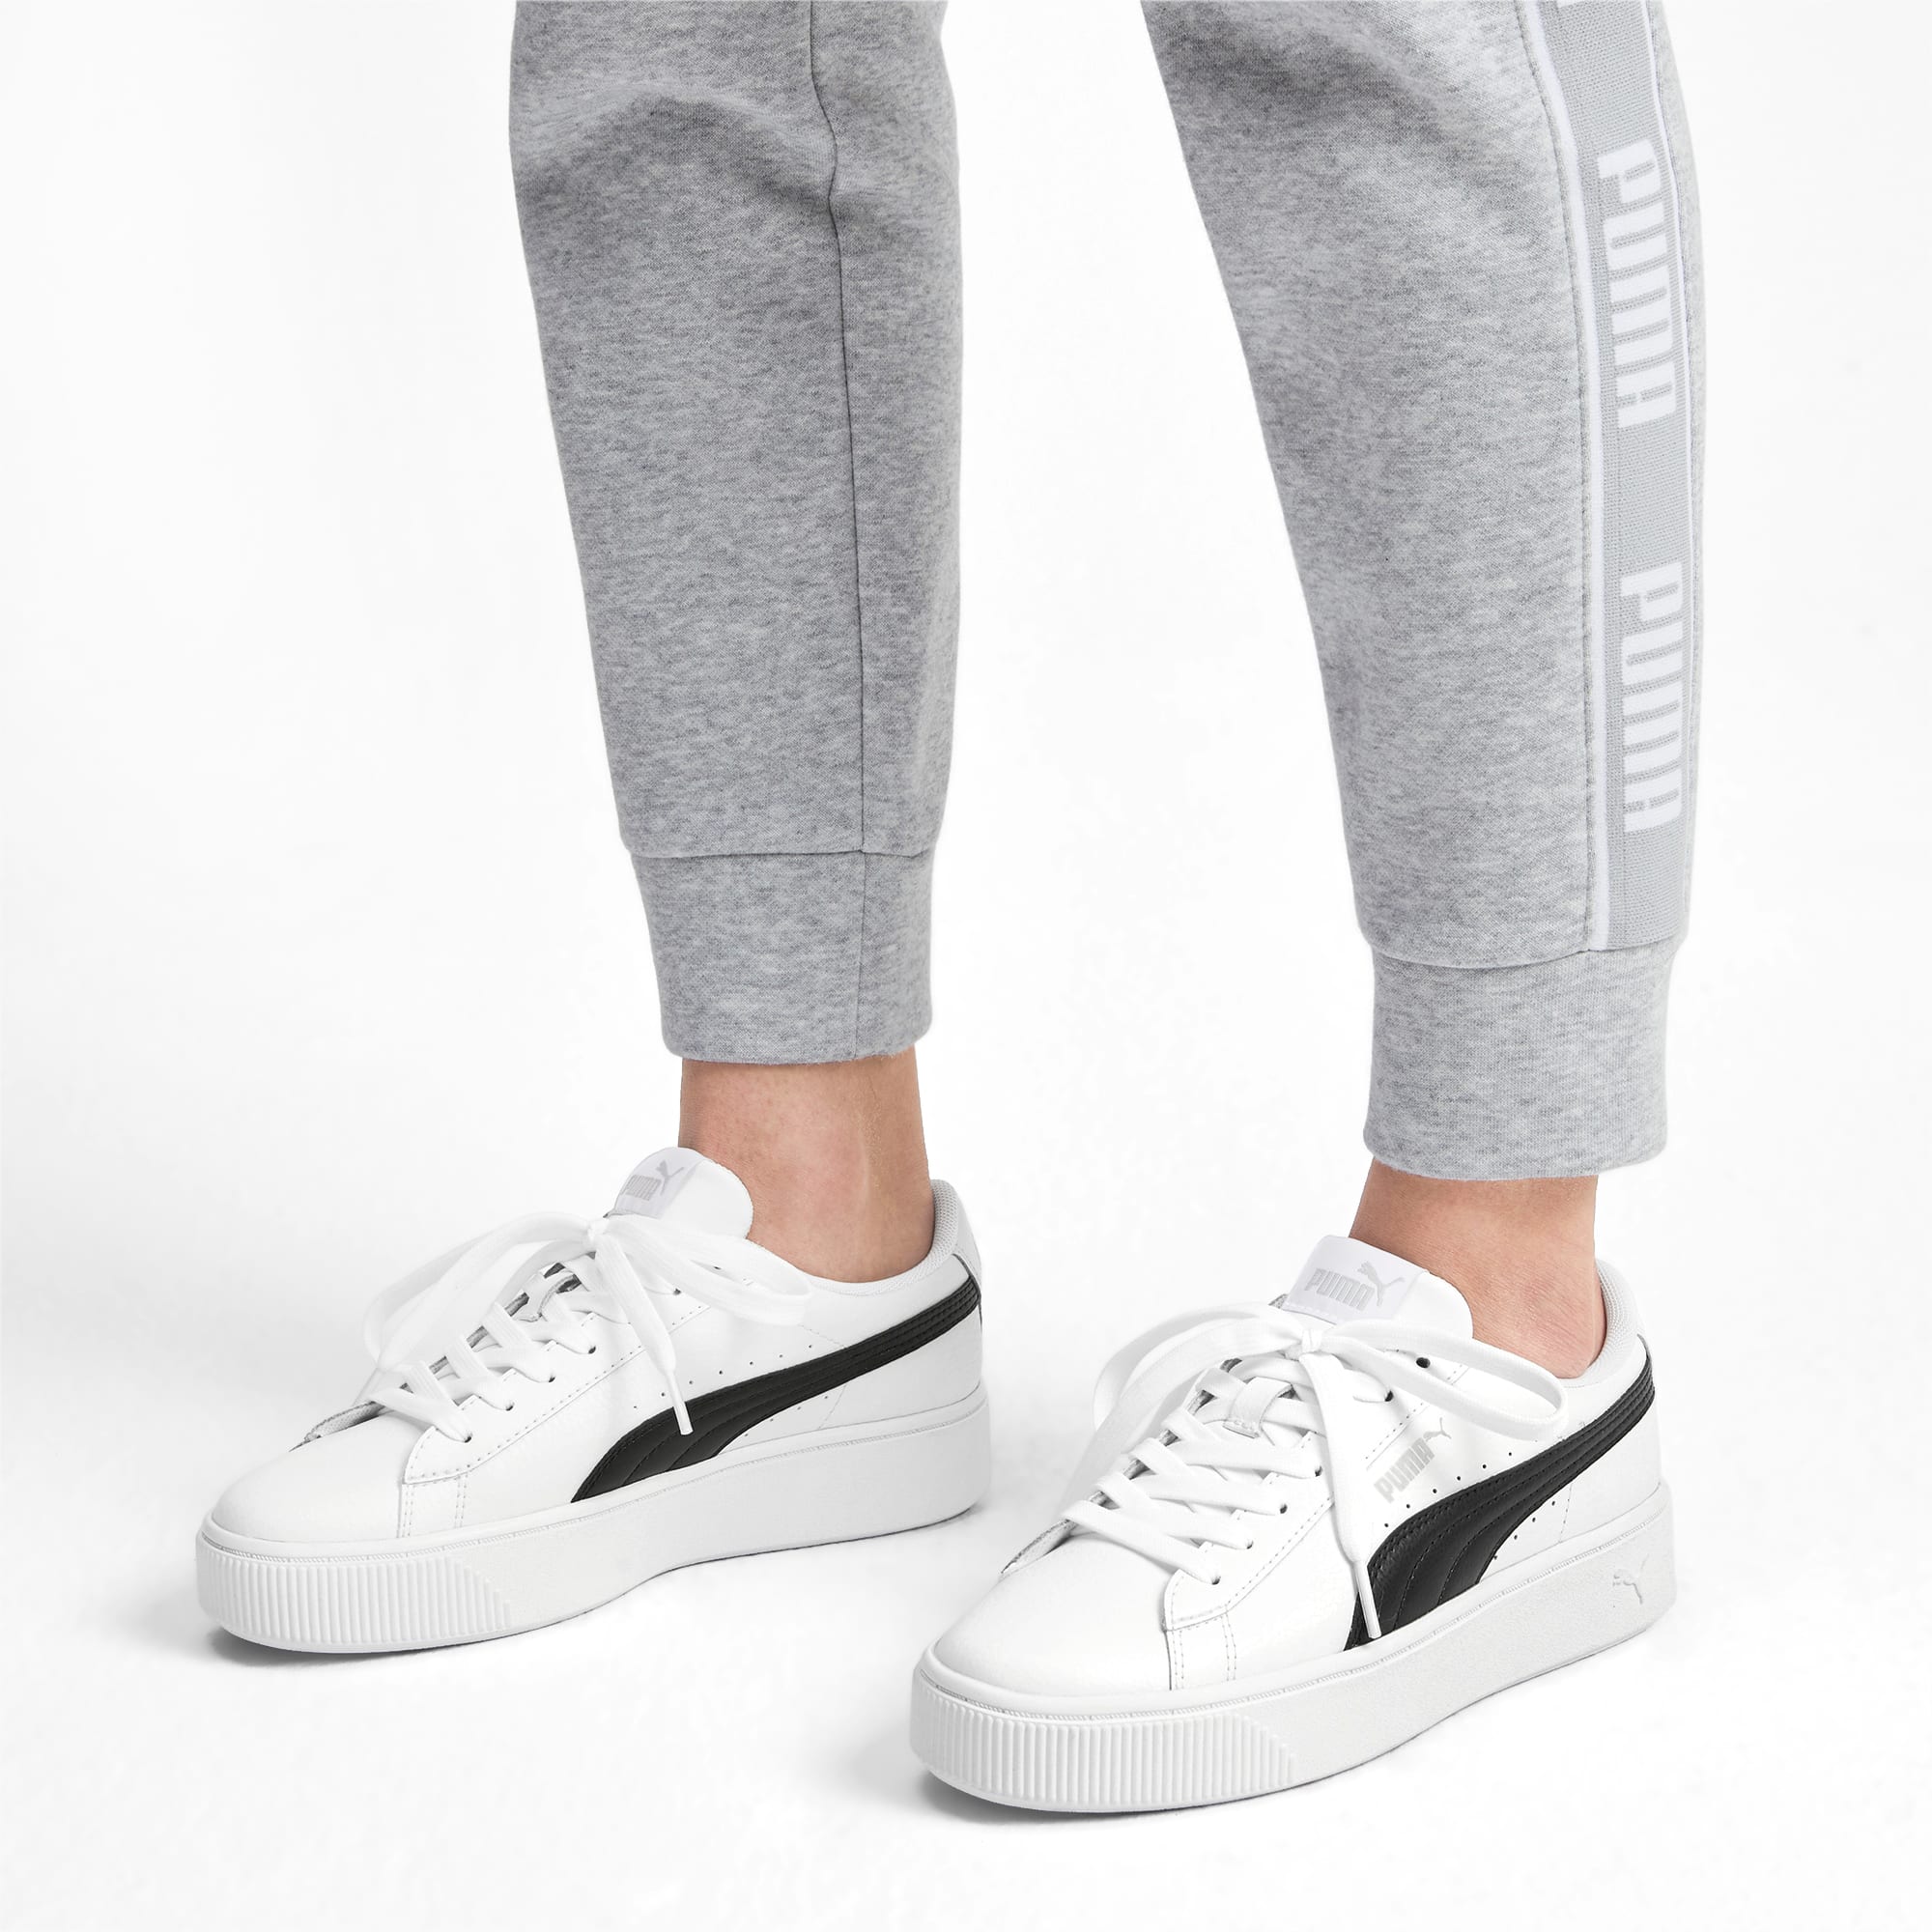 PUMA Vikky Stacked Women's Trainers 